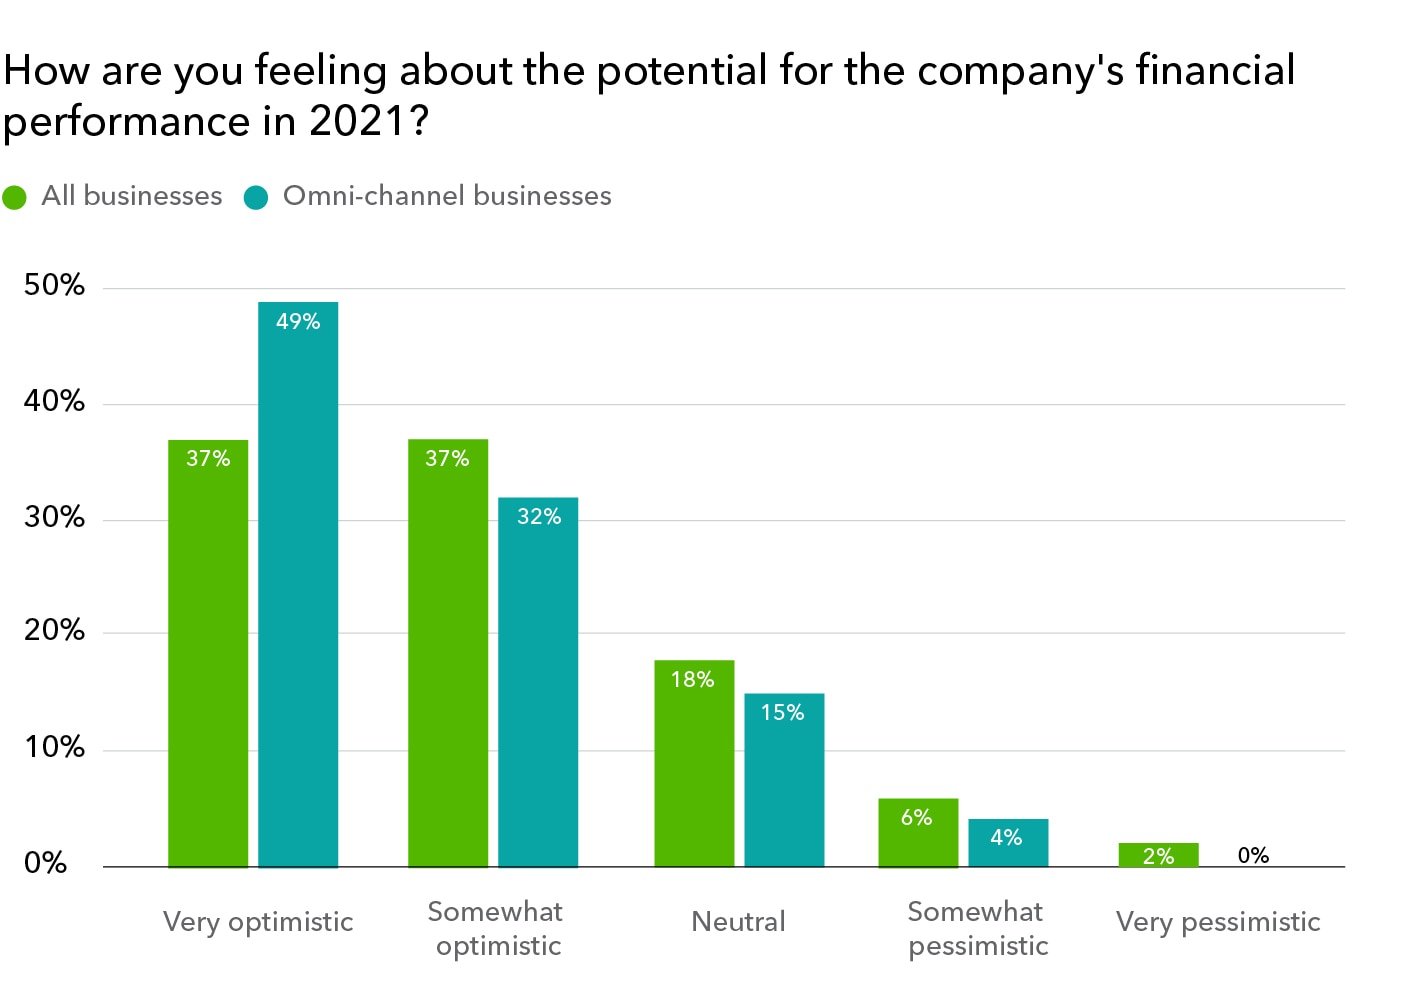 Business owners' feelings on profit potential in 2021